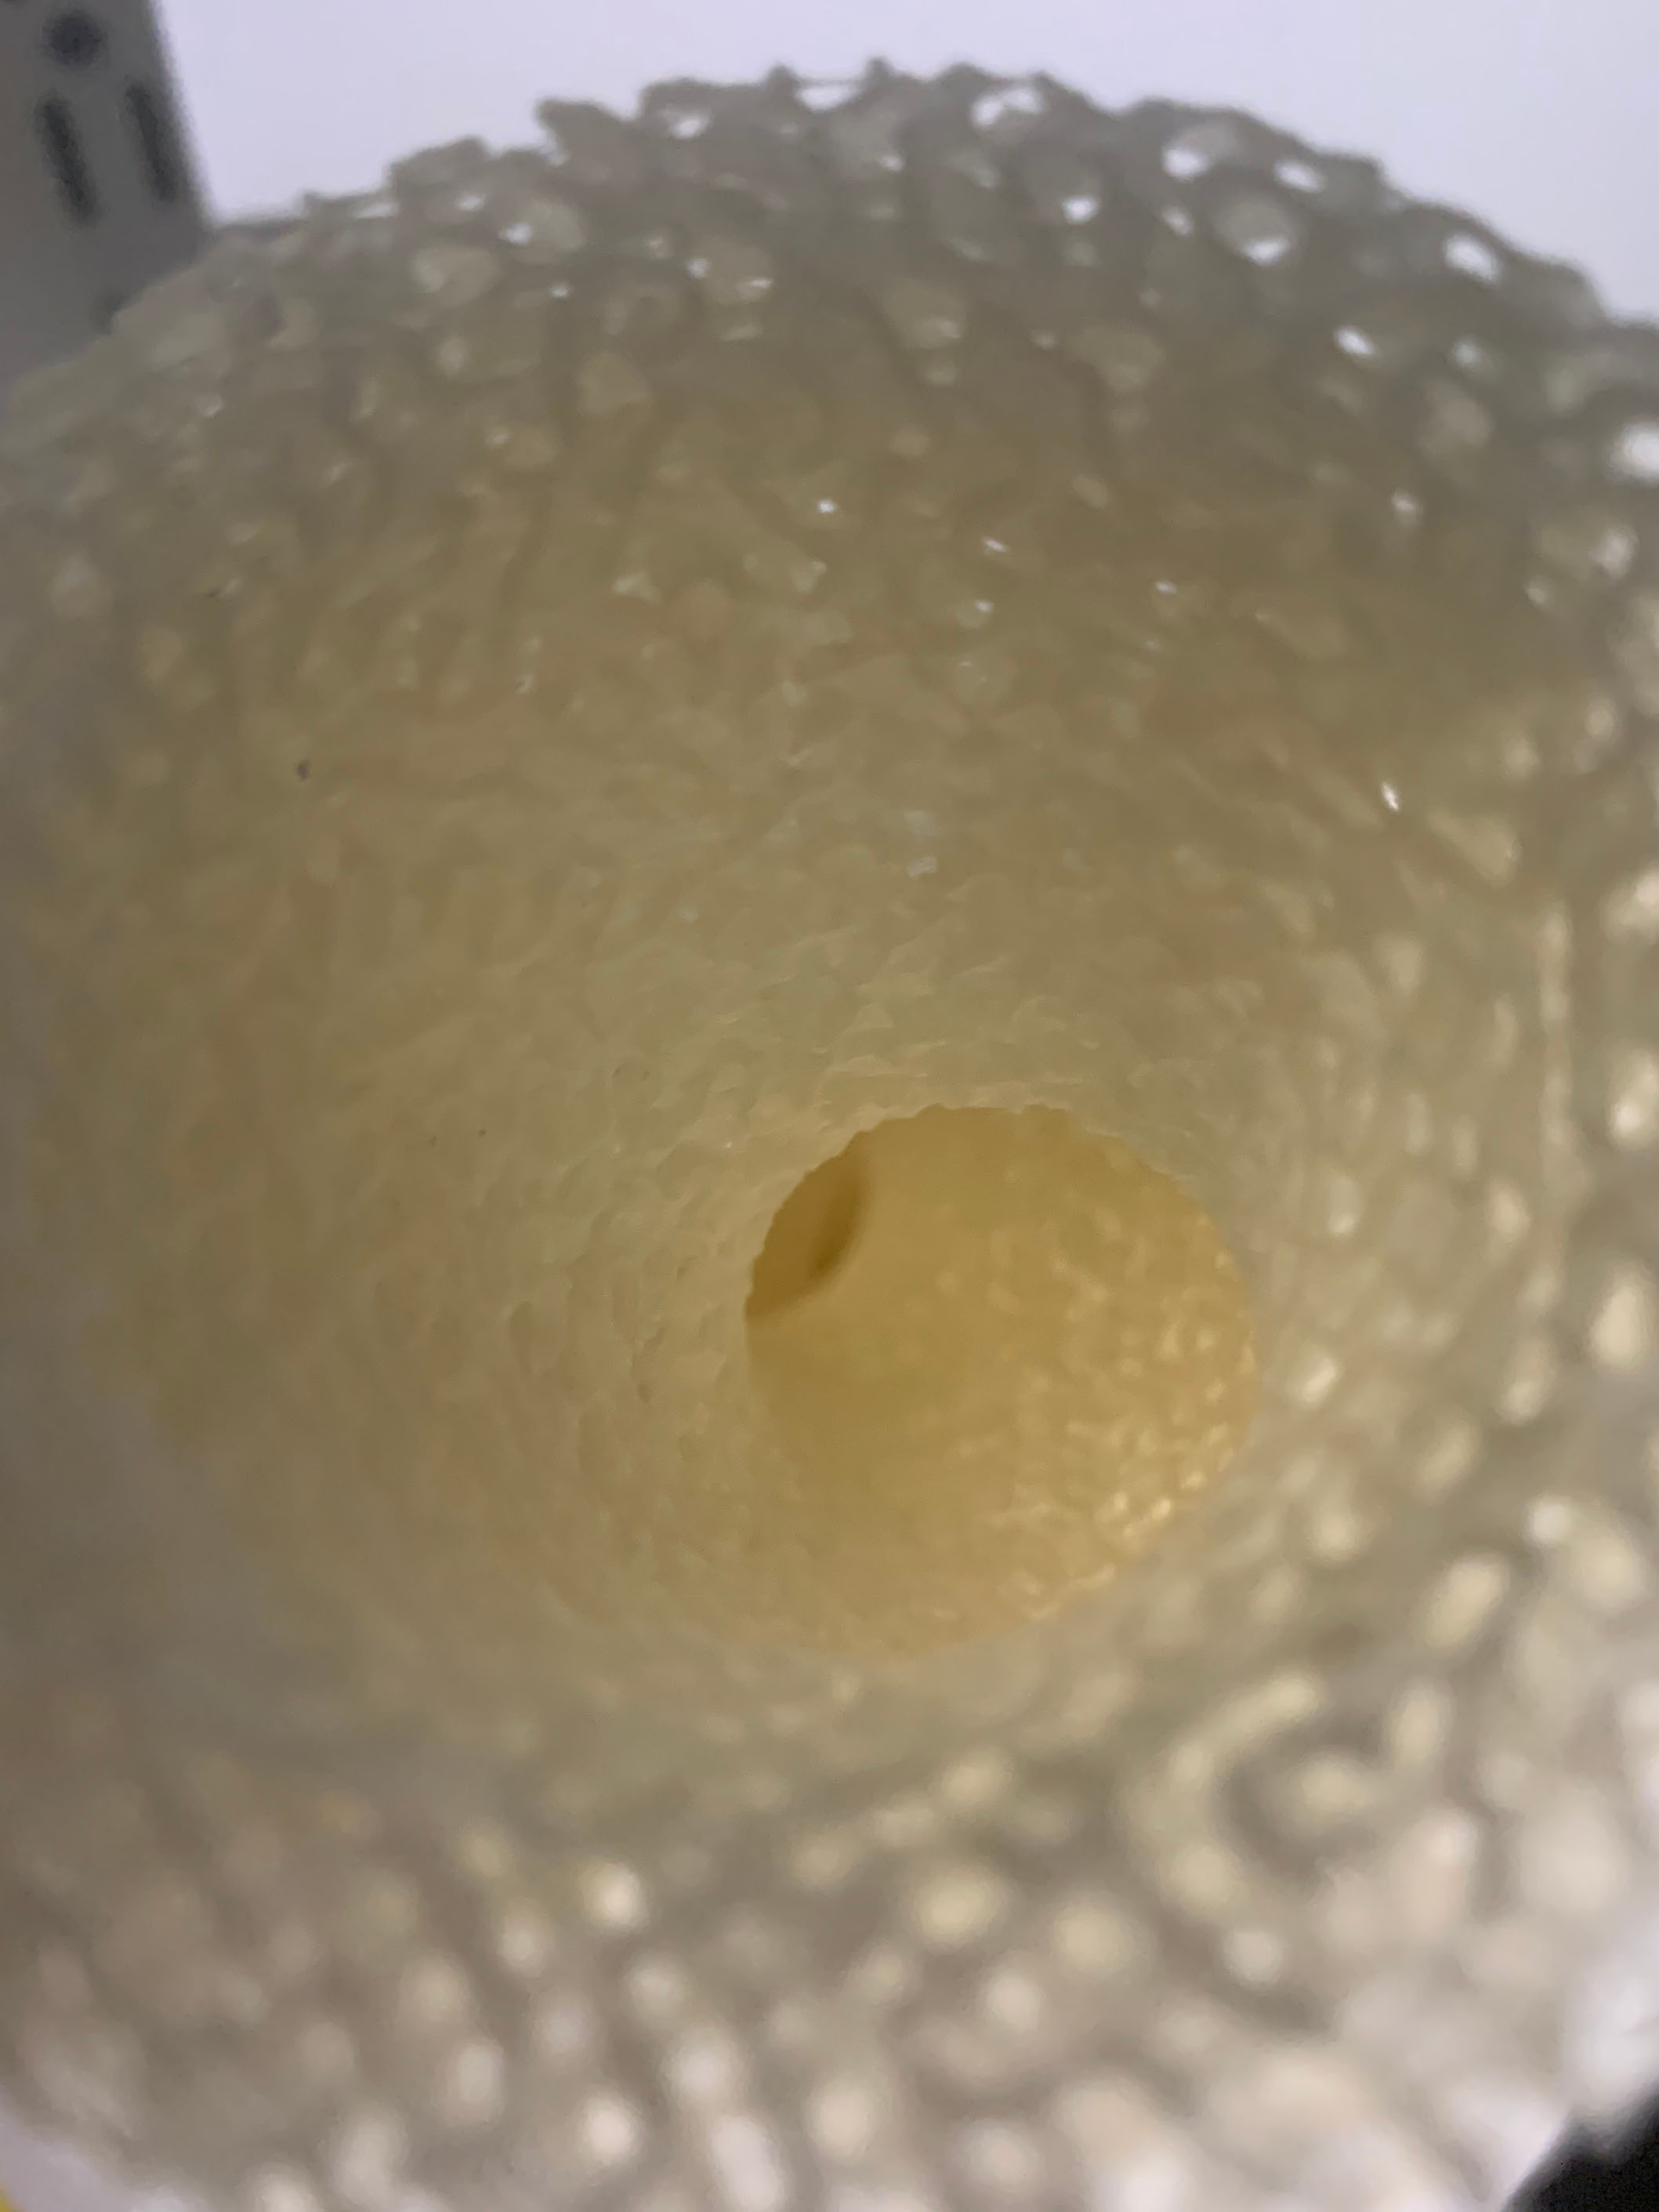 the inside of the coral looking vase